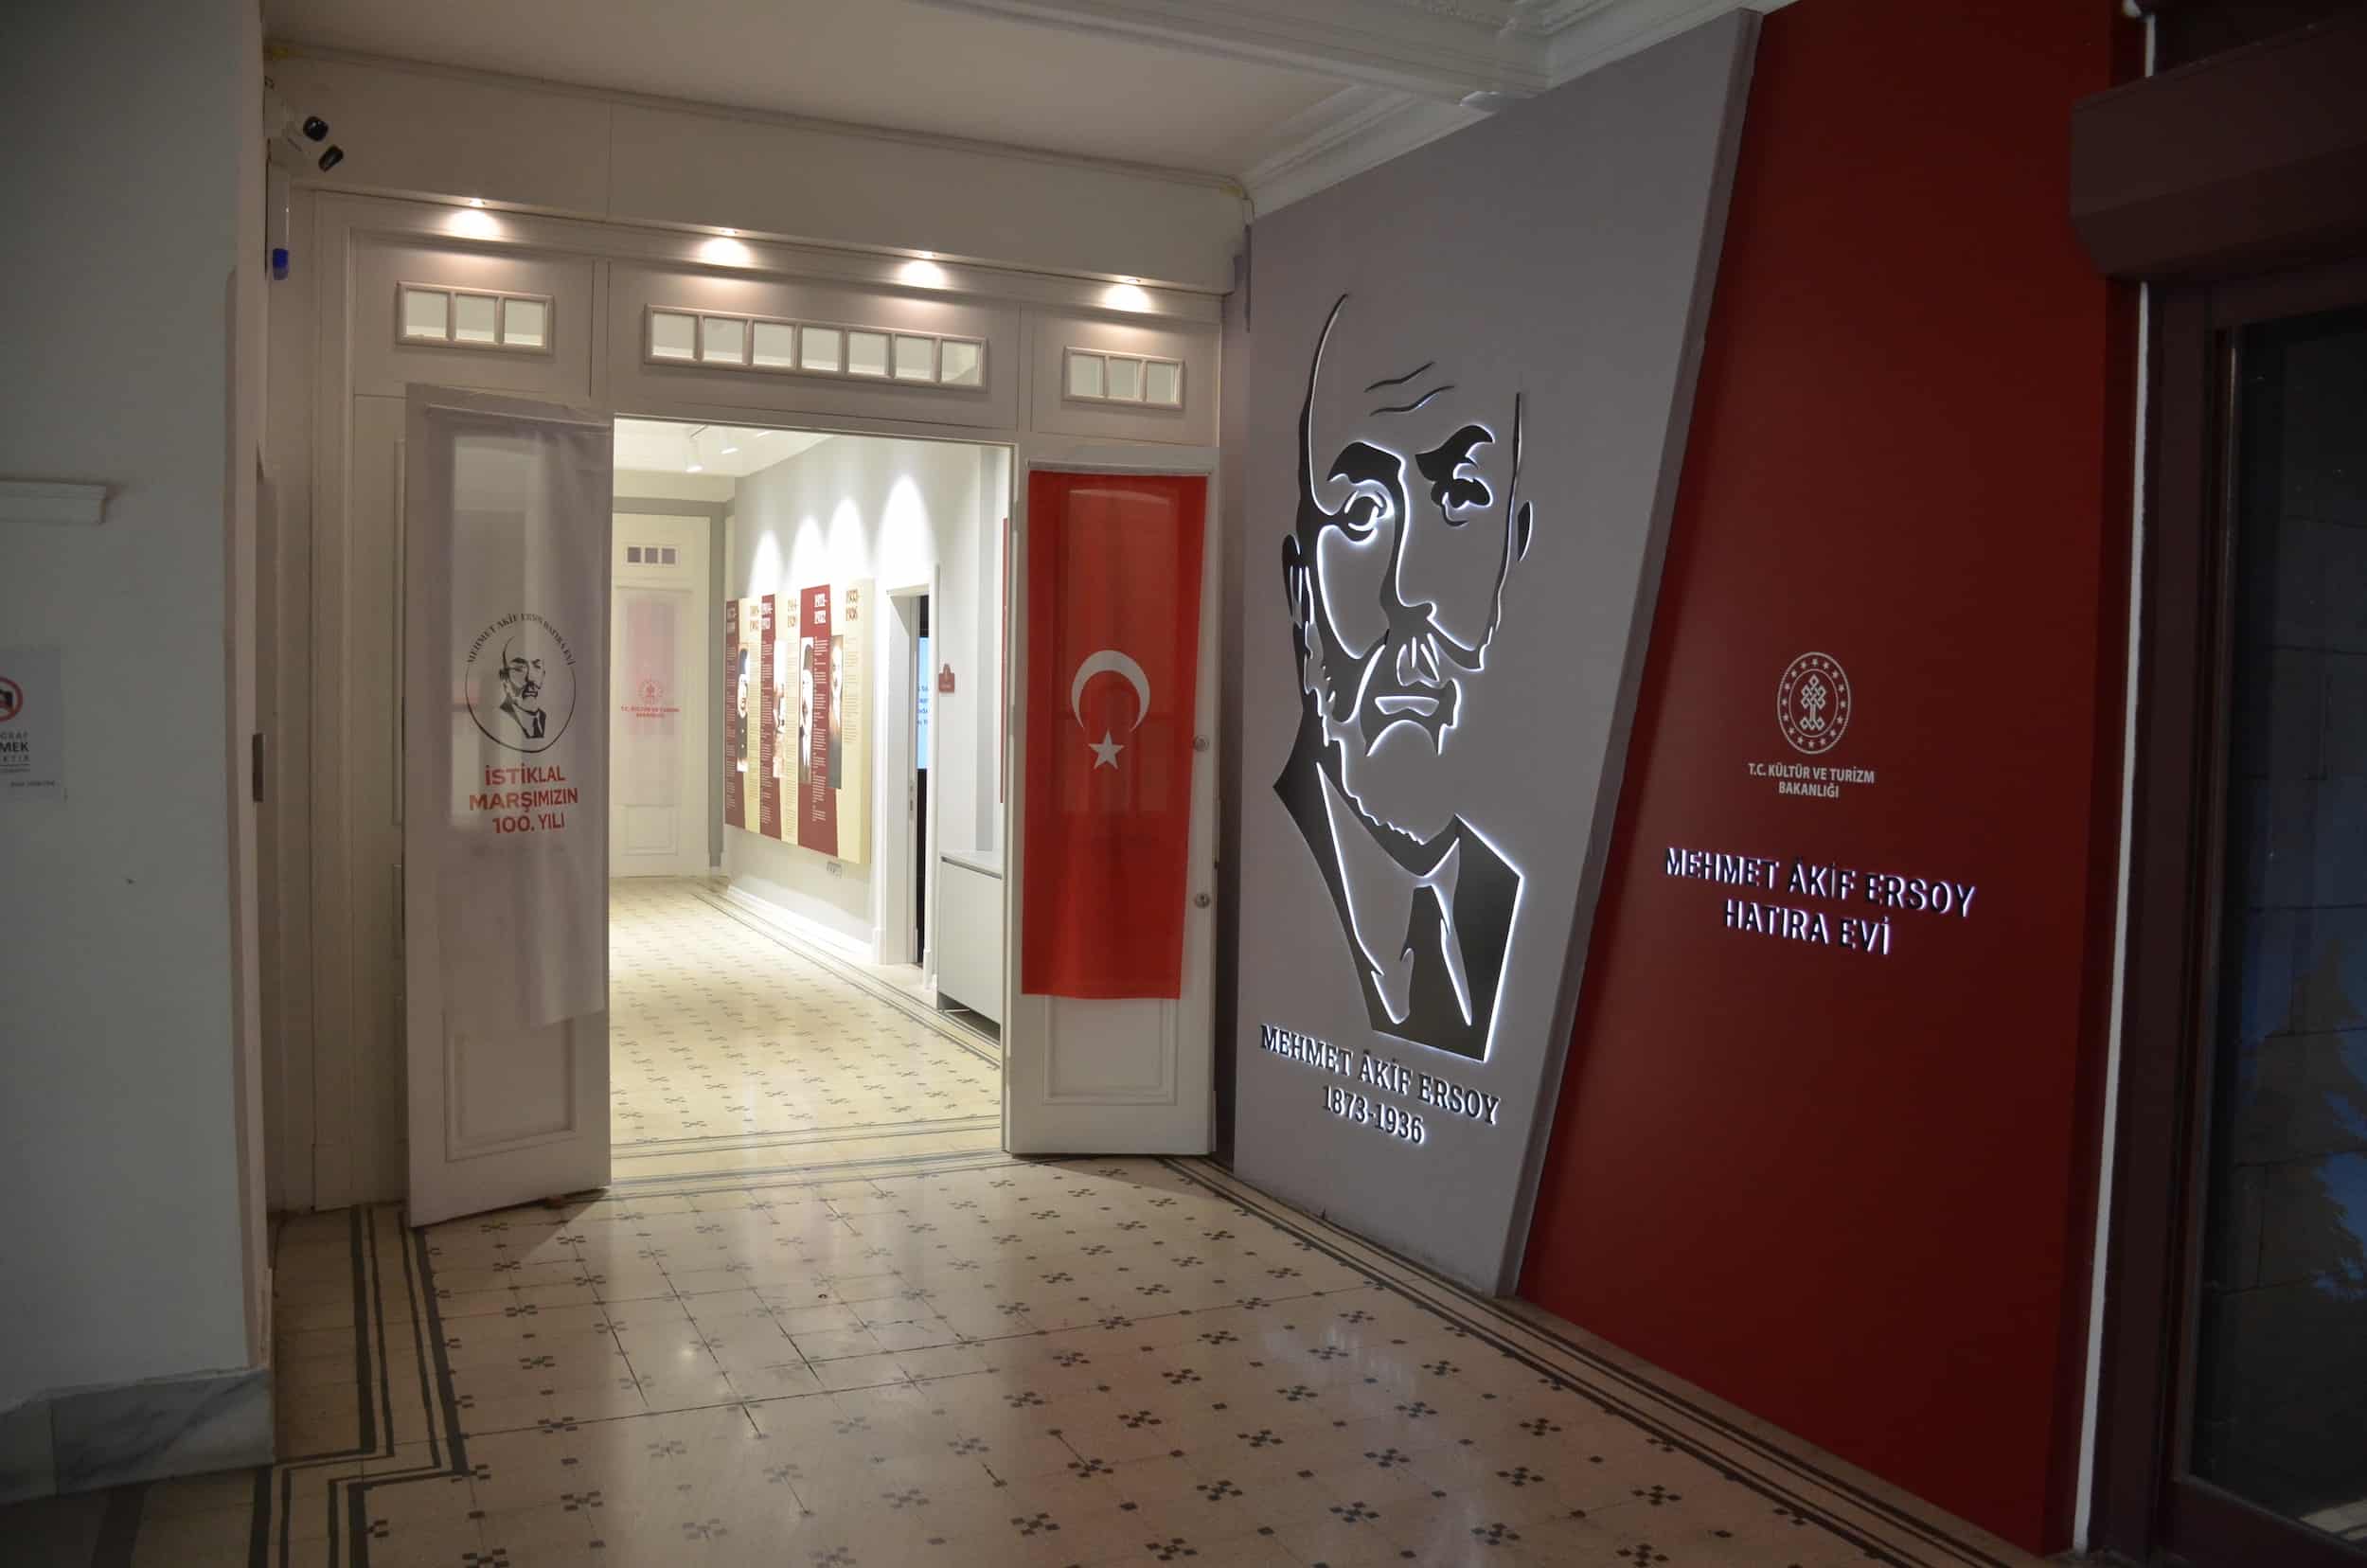 Mehmet Akif Ersoy Memorial House in the Egypt Apartment in Istanbul, Turkey